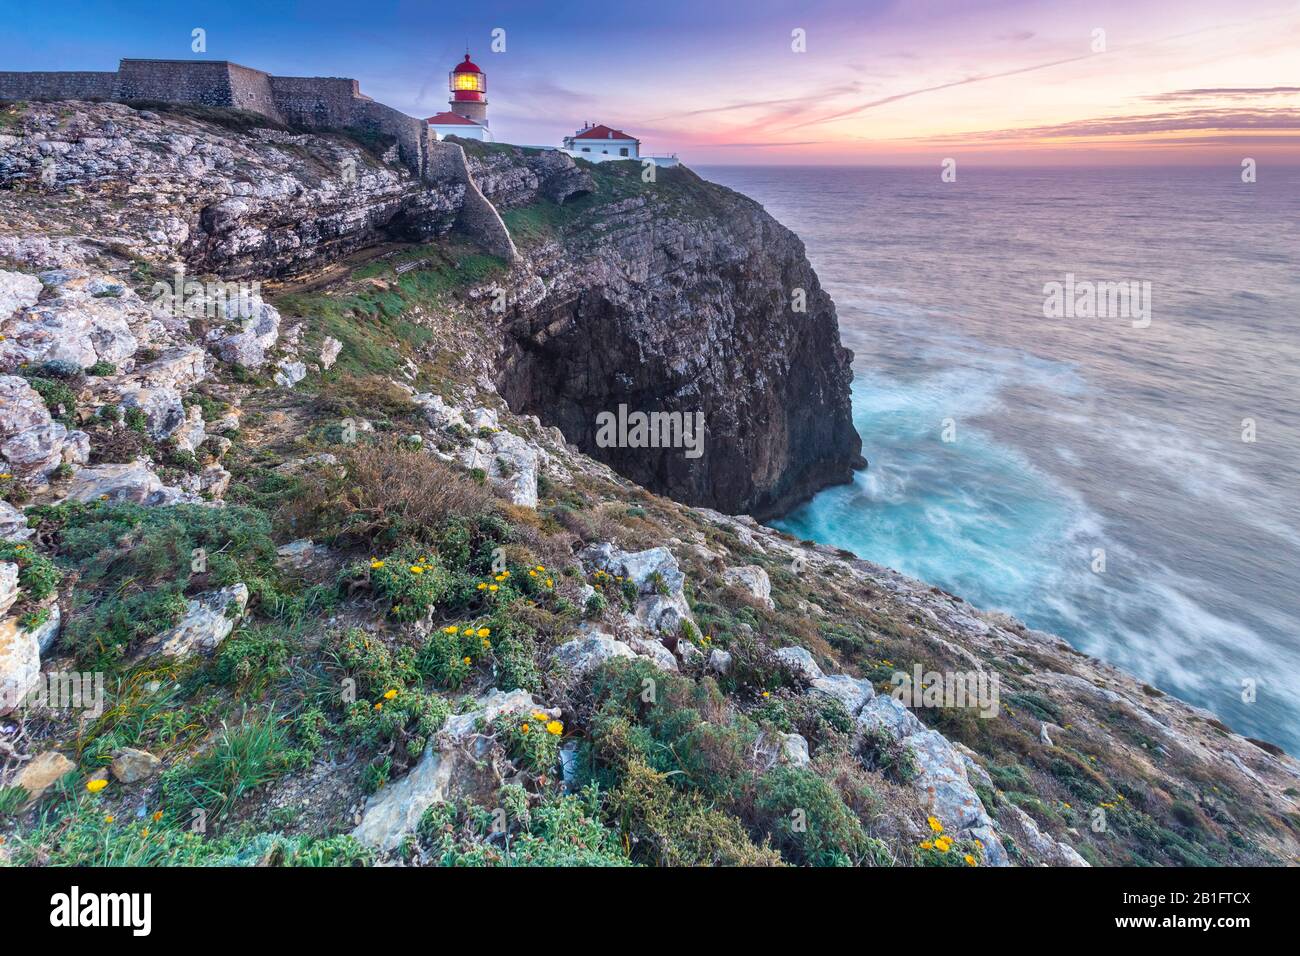 The cliffs and lighthouse of Cabo De San Vicente at sunset, overlooking the Atlantic Ocean. Sagres, Vila do Bispo, Algarve, Portugal, Europe. Stock Photo